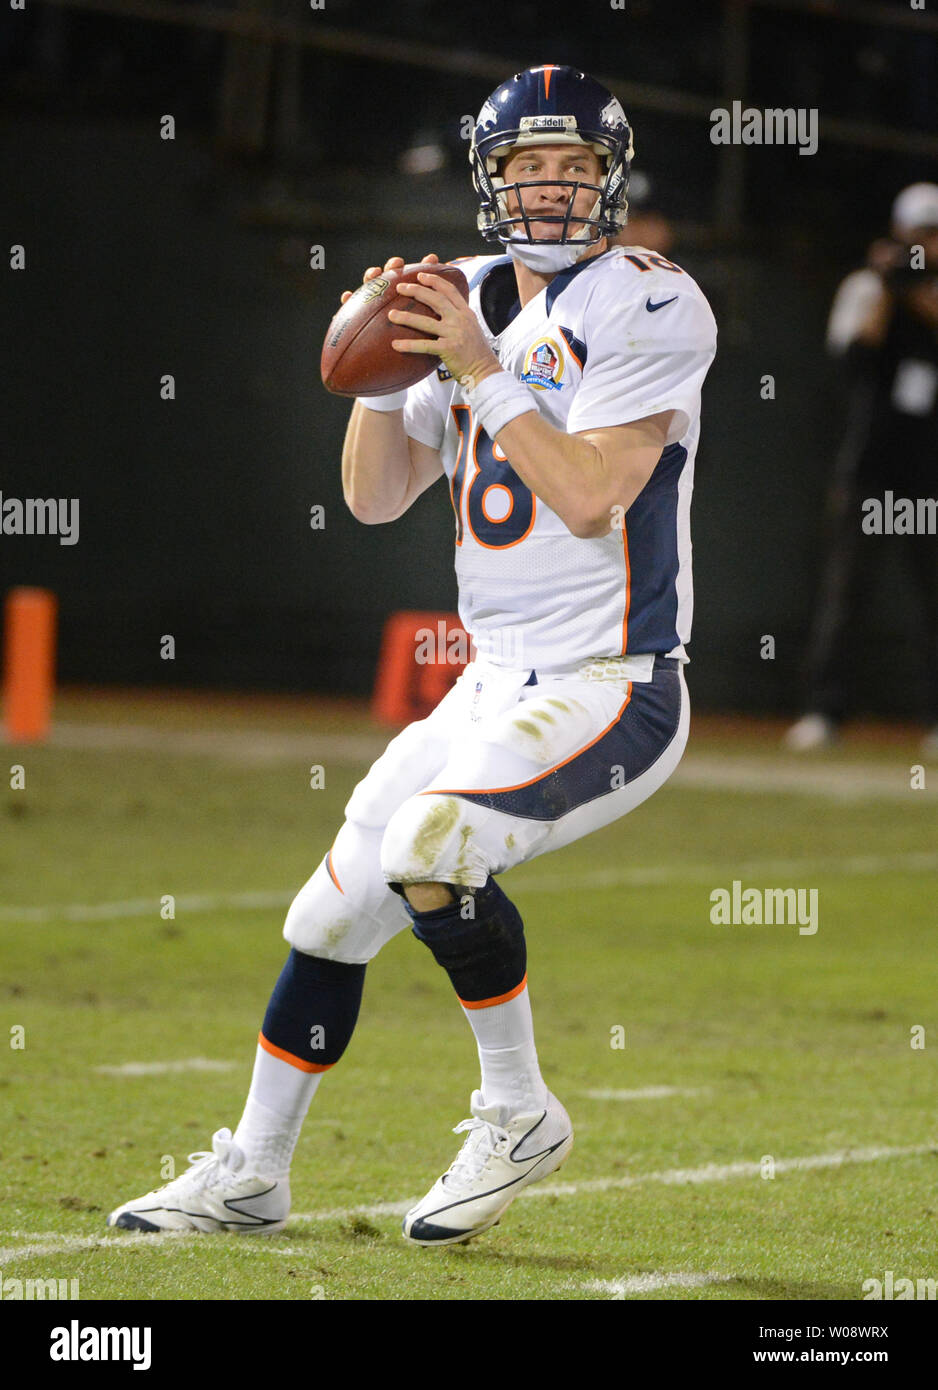 Denver Broncos QB Peyton Manning (18) throws against the Oakland Raiders in the first quarter at O.co Coliseum in Oakland, California on December 6, 2012. The Broncos defeated the Raiders 26-13.  UPI/Terry Schmitt Stock Photo